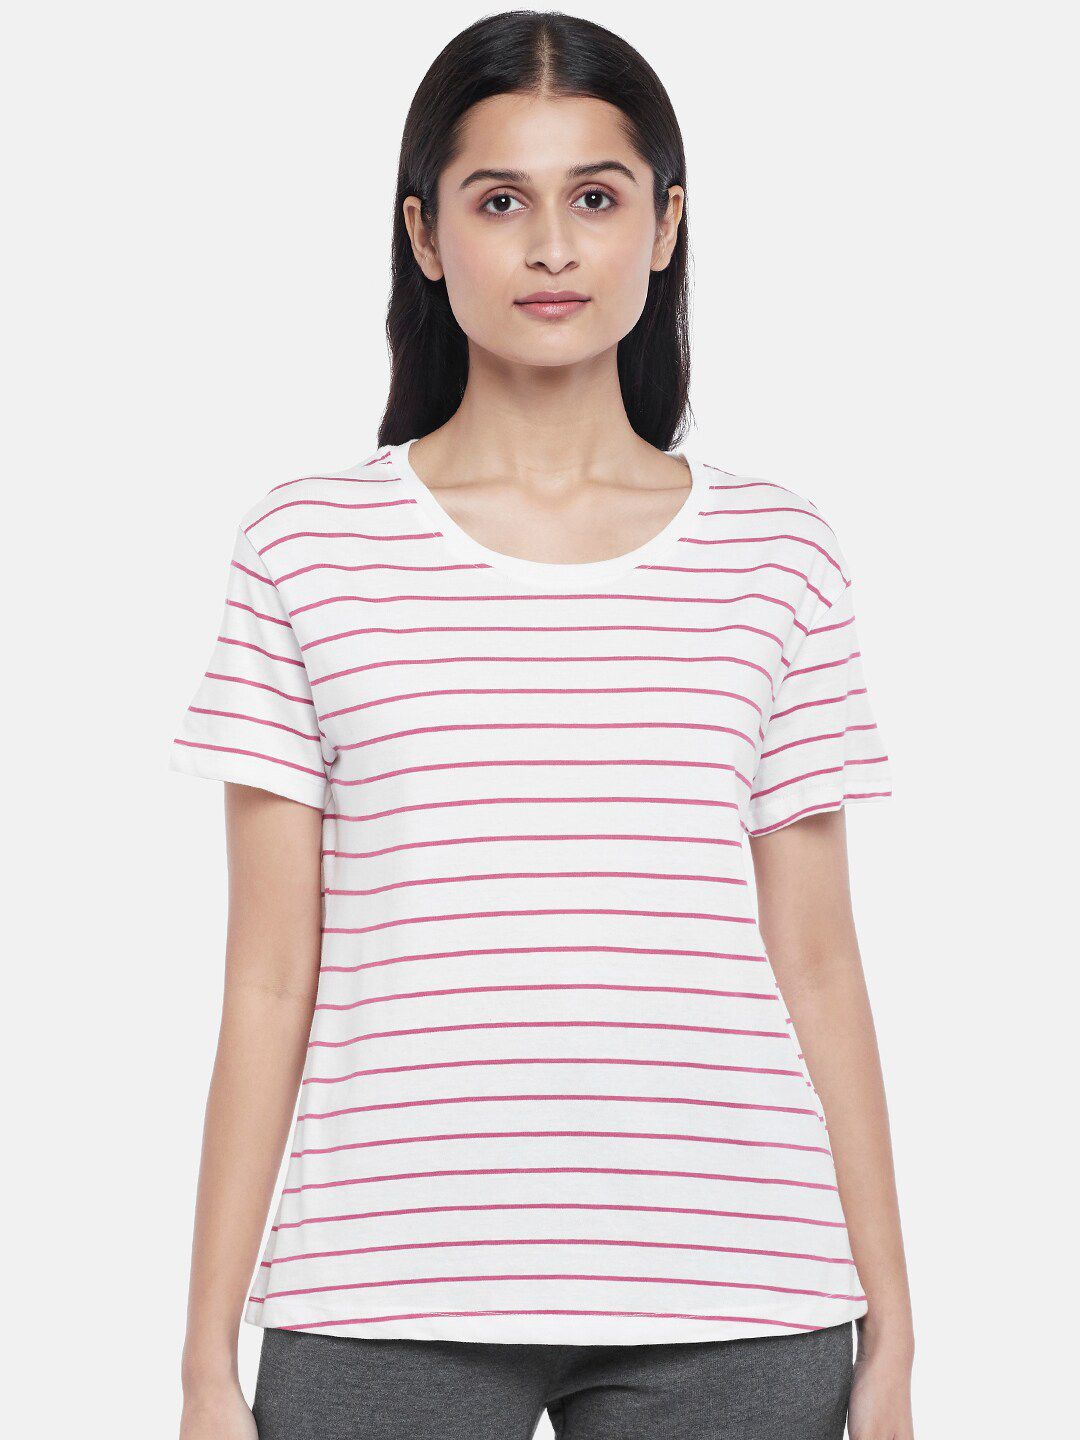 Dreamz by Pantaloons Off White Striped Lounge tshirt Price in India